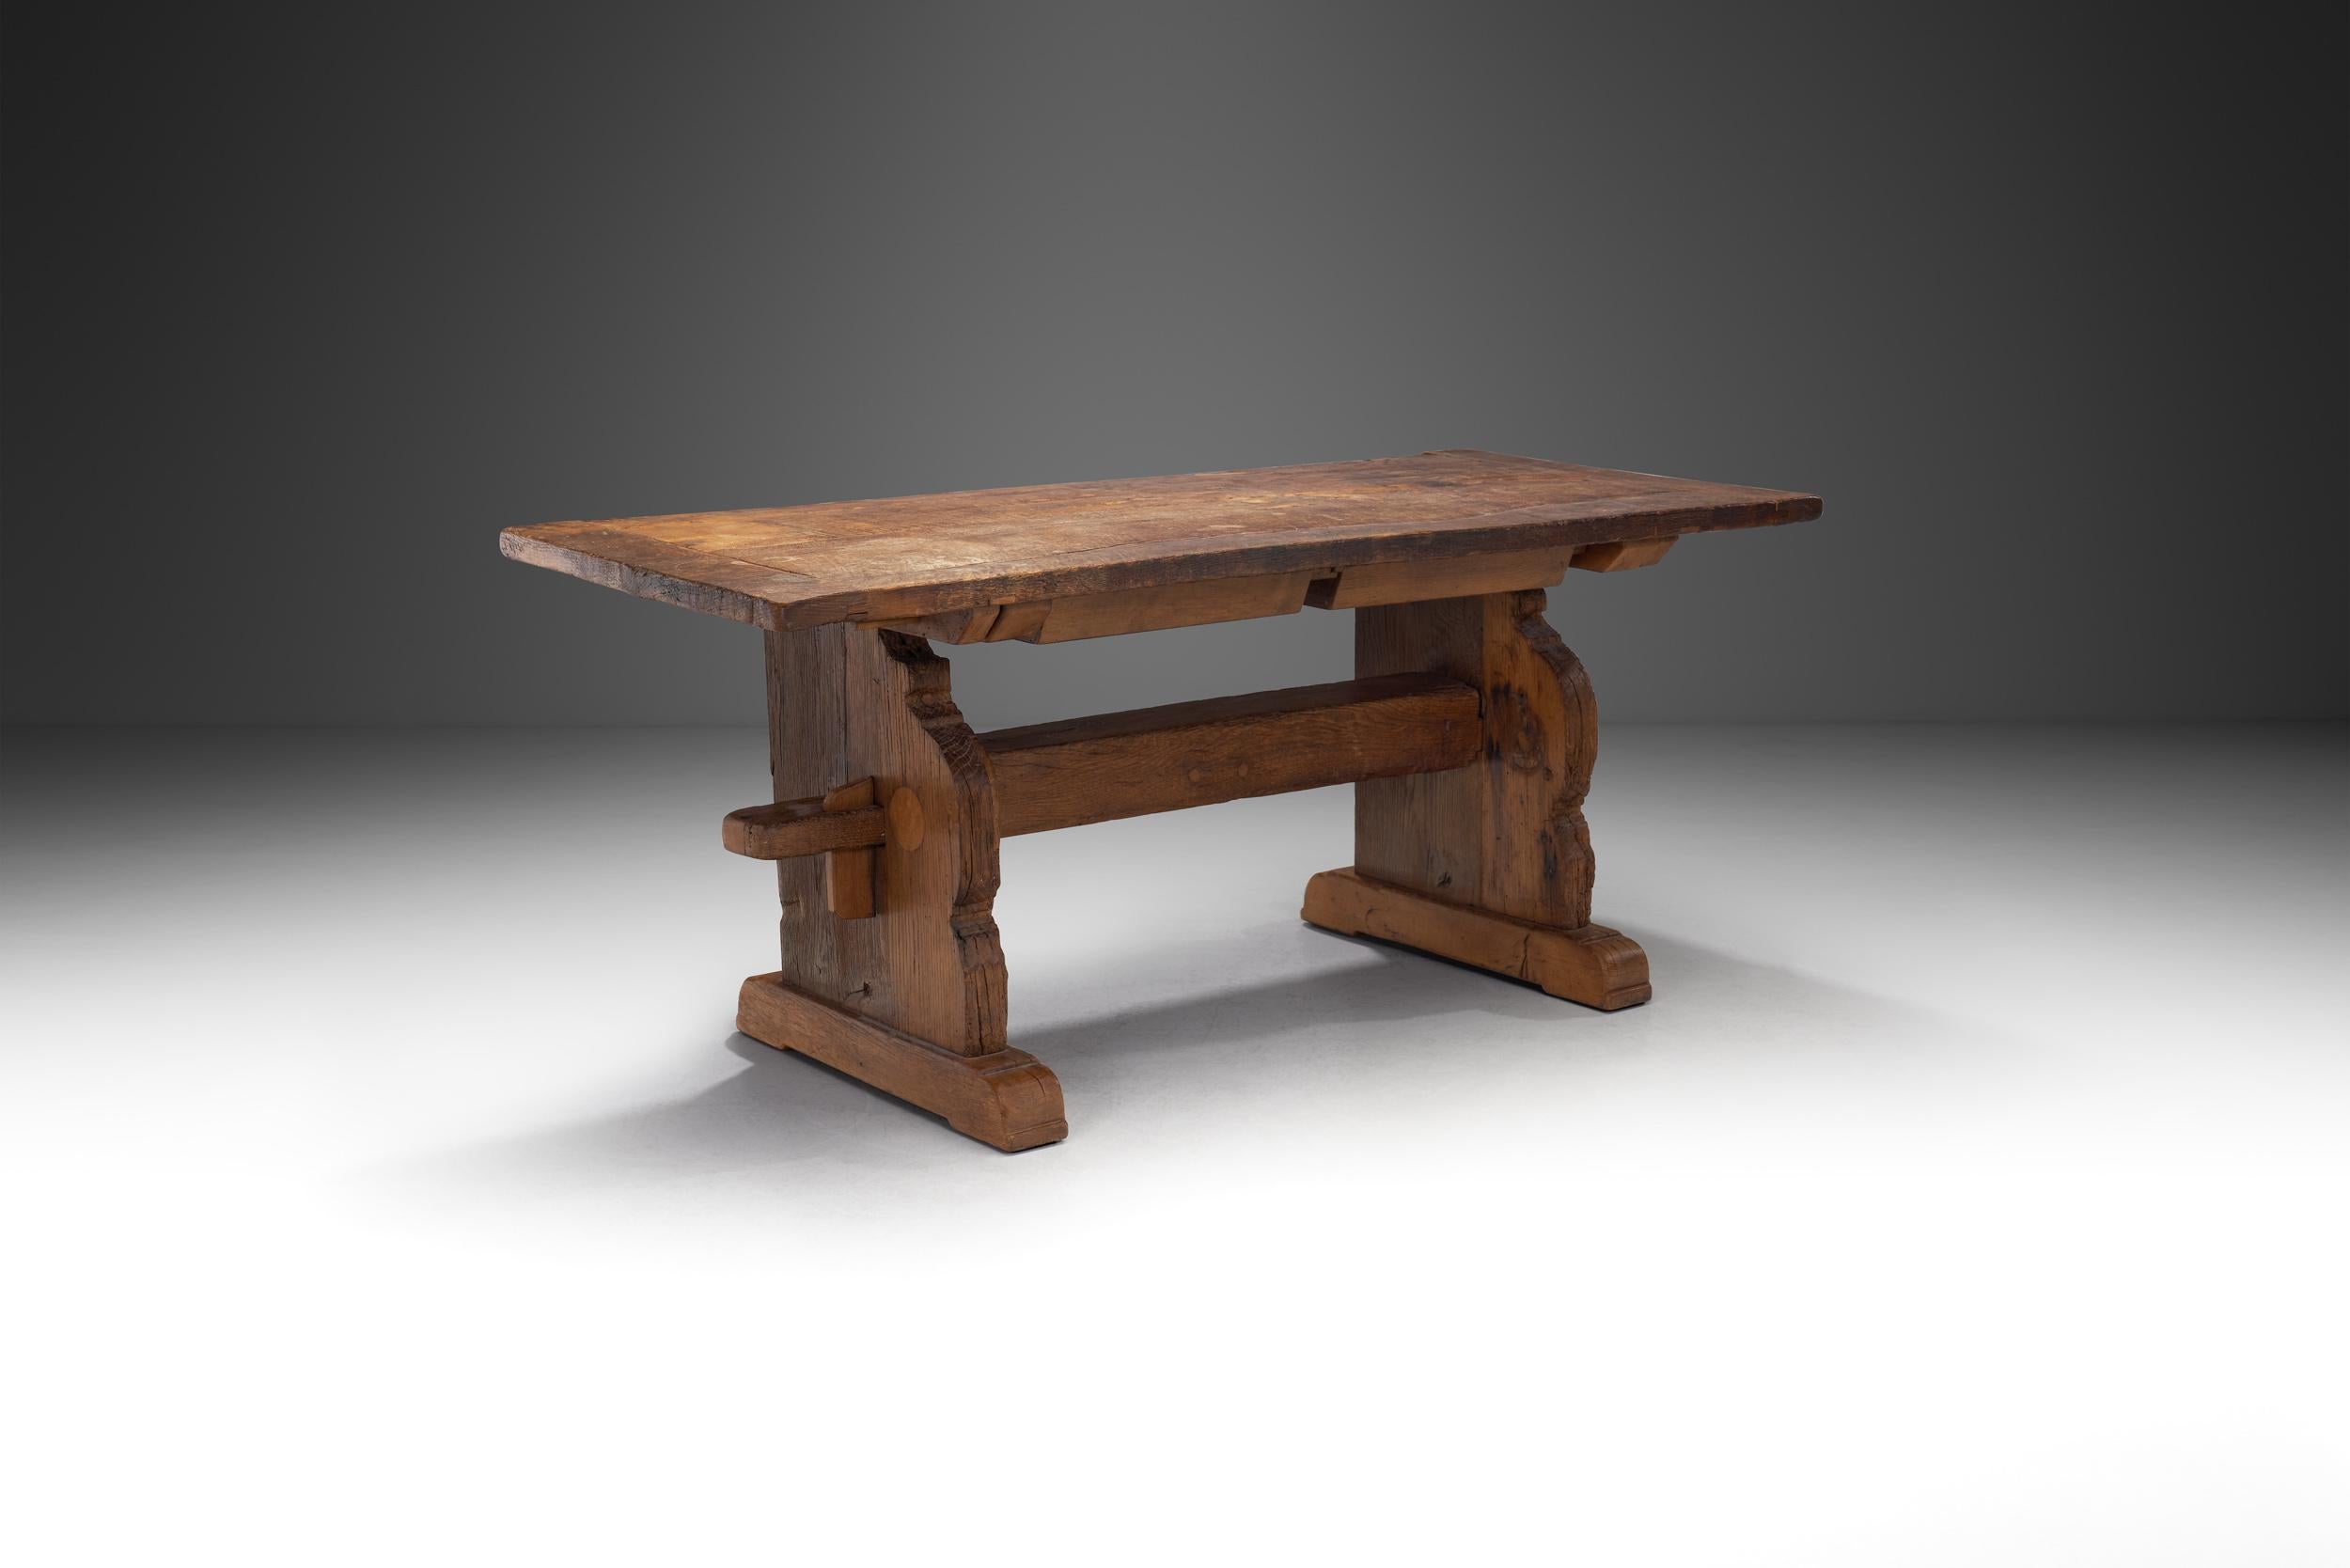 In most mid-century European design, there was an early emphasis on wood as it connected everyday objects, such as furniture to nature. This rustic, solid wood table is a perfect example of this sentiment, and the visual benefits of an understated,